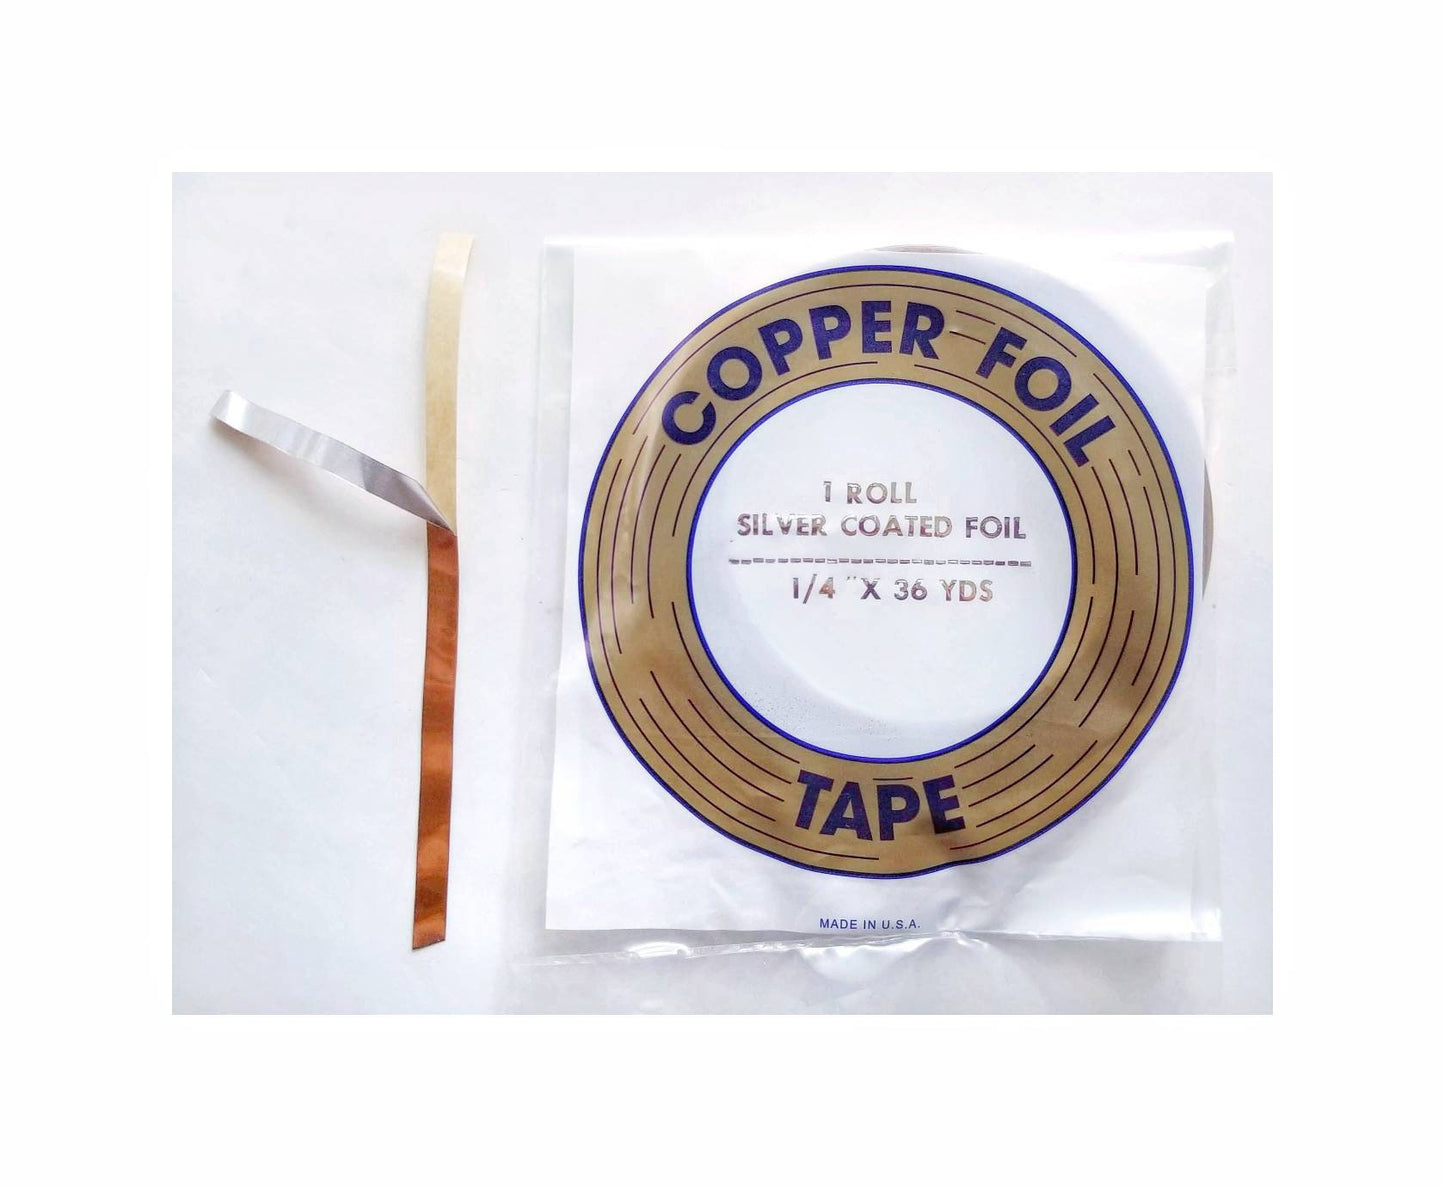 Copper Foil Tape, Silver Backed. 1/4" wide. Stained Glass, Jewelry & Memory photo lockets Wire Art, Metal Soldering. Trial size or Roll.